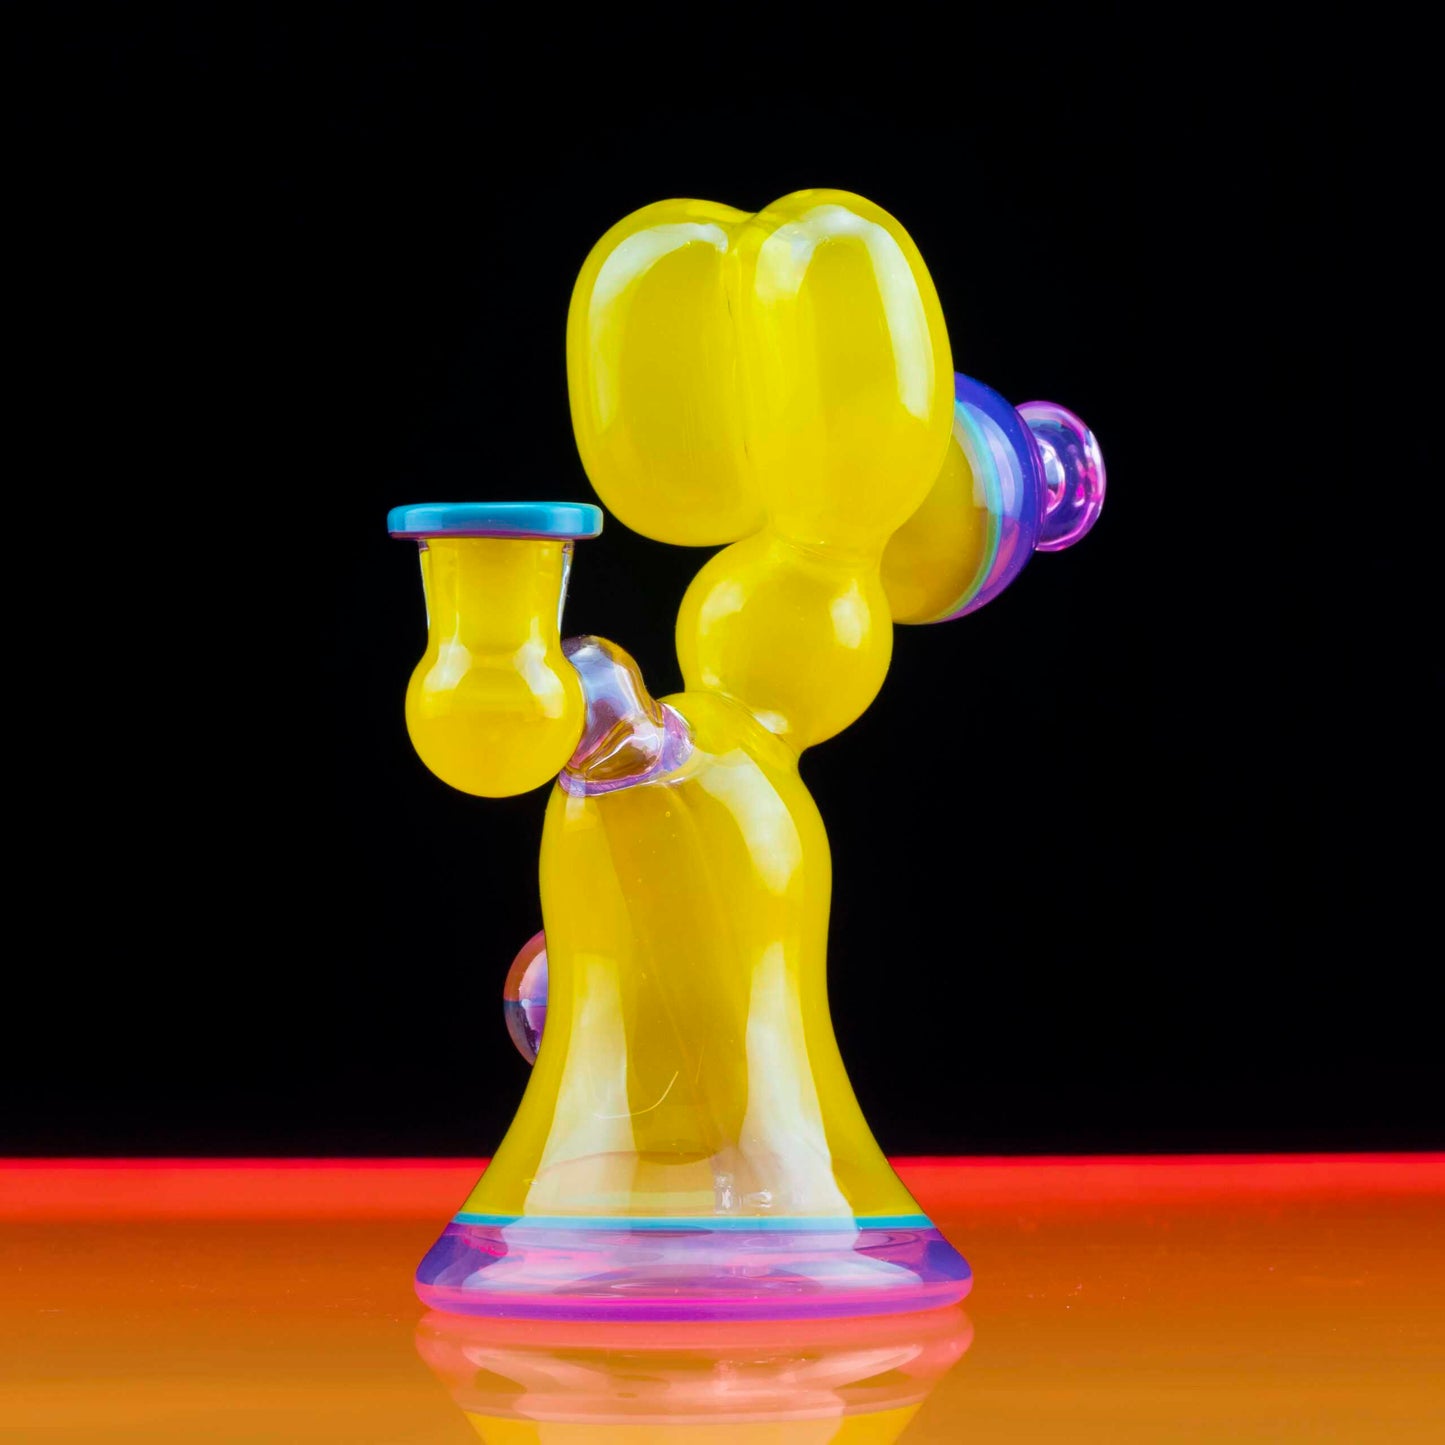 heady art piece - [Design 1] Deluxe Patterned Balloon Dog Head Banger Hanger Jammer (w/ Signed 1200 Pelican Case) by Blitzkriega